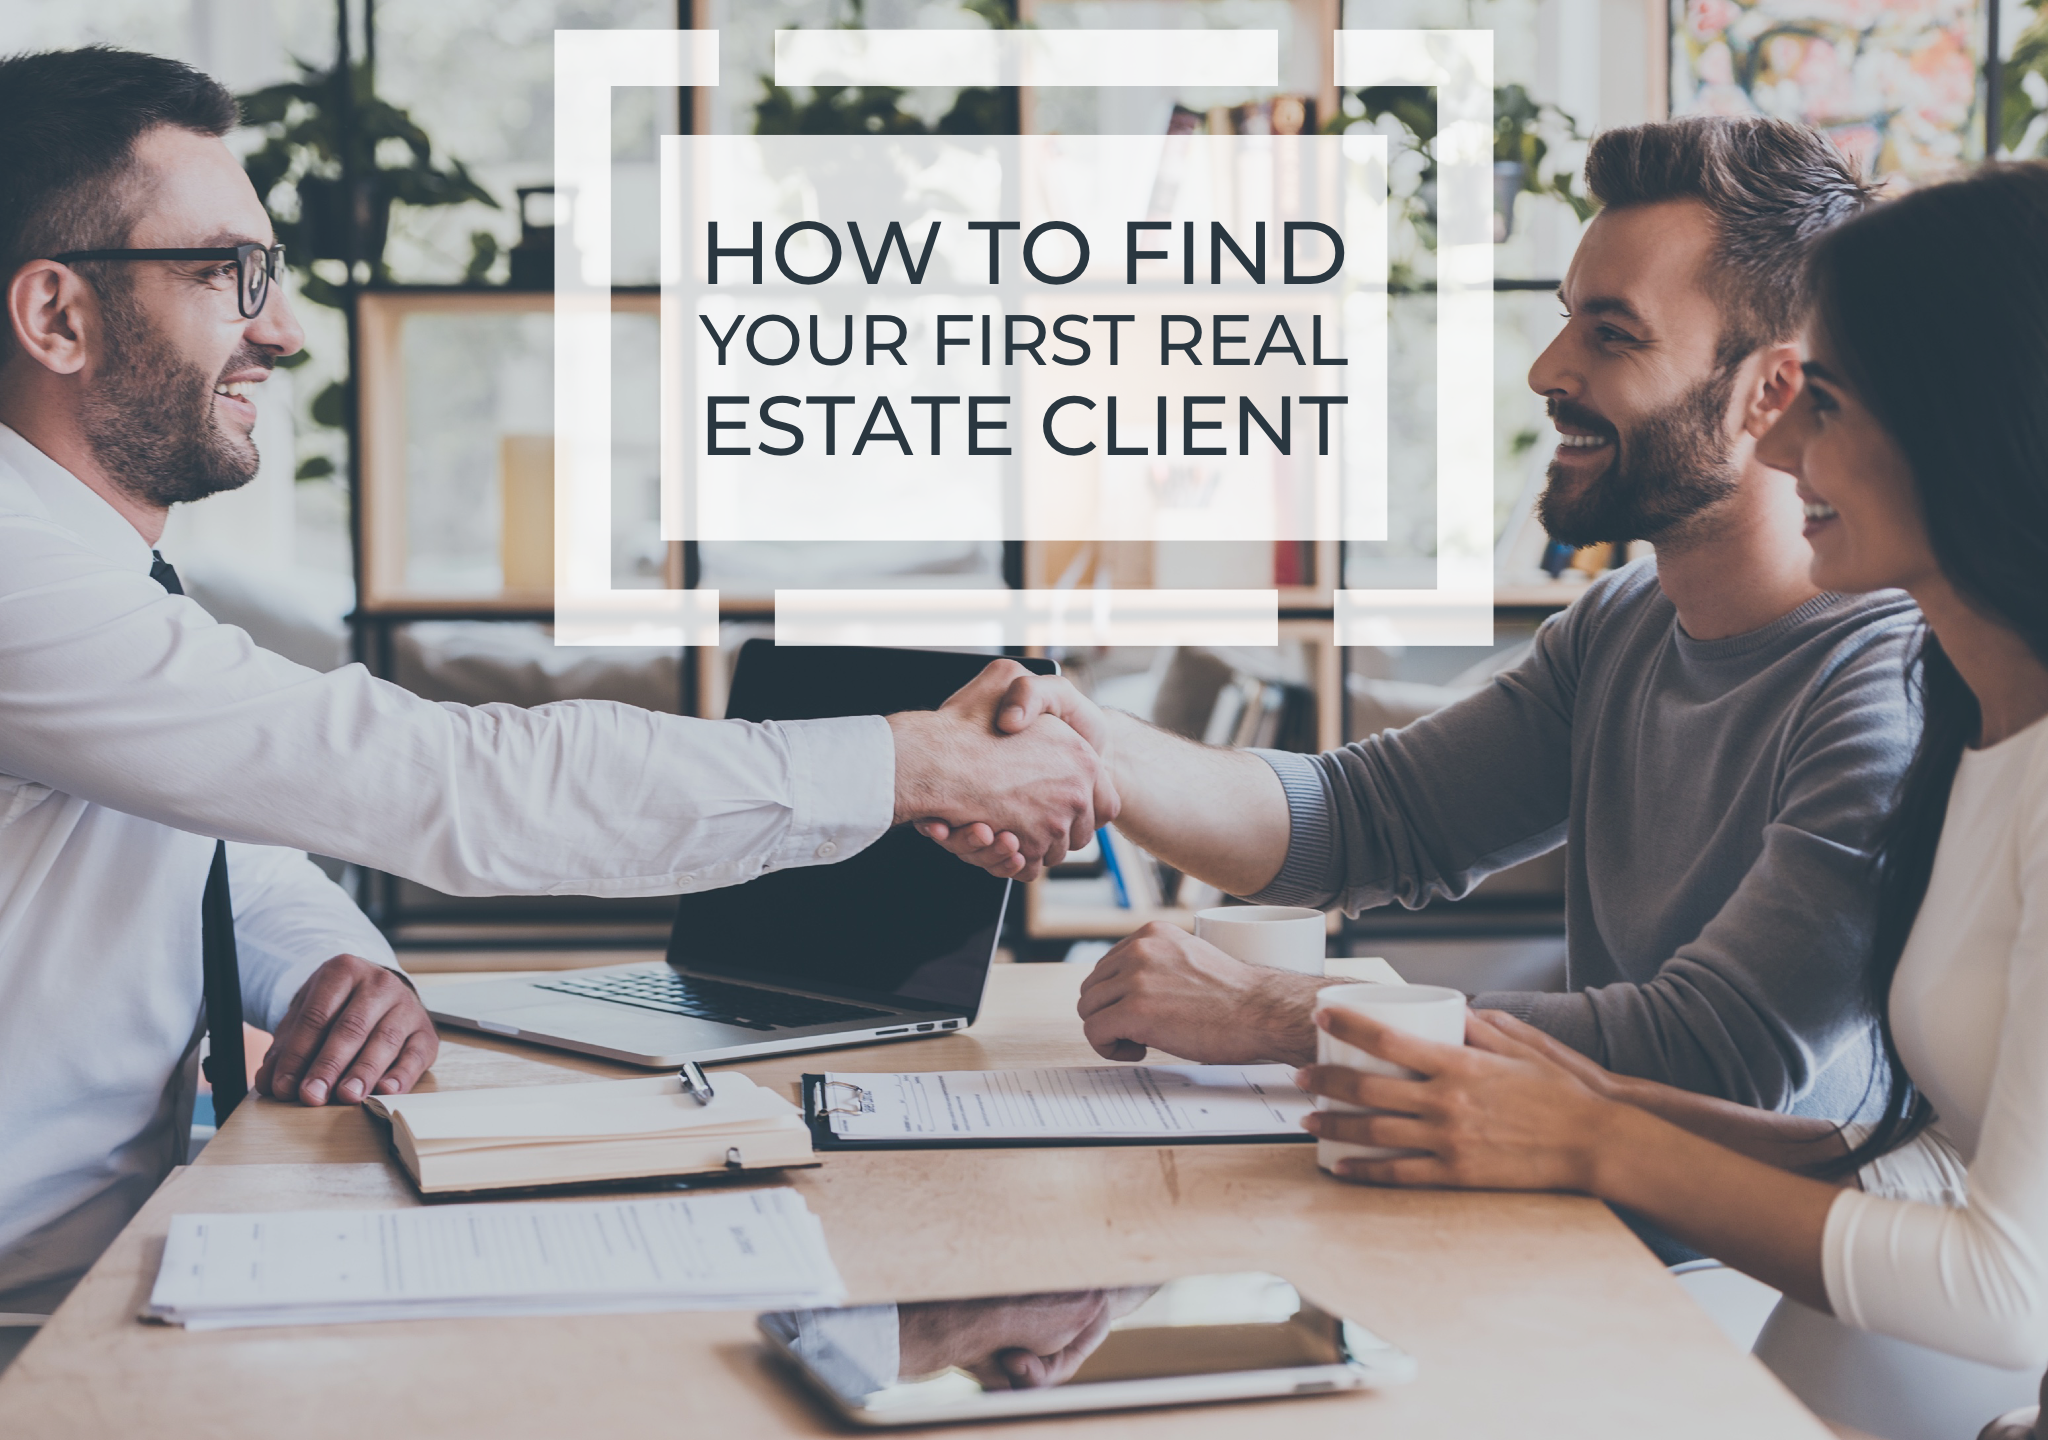 How to Find Your First Real Estate Client